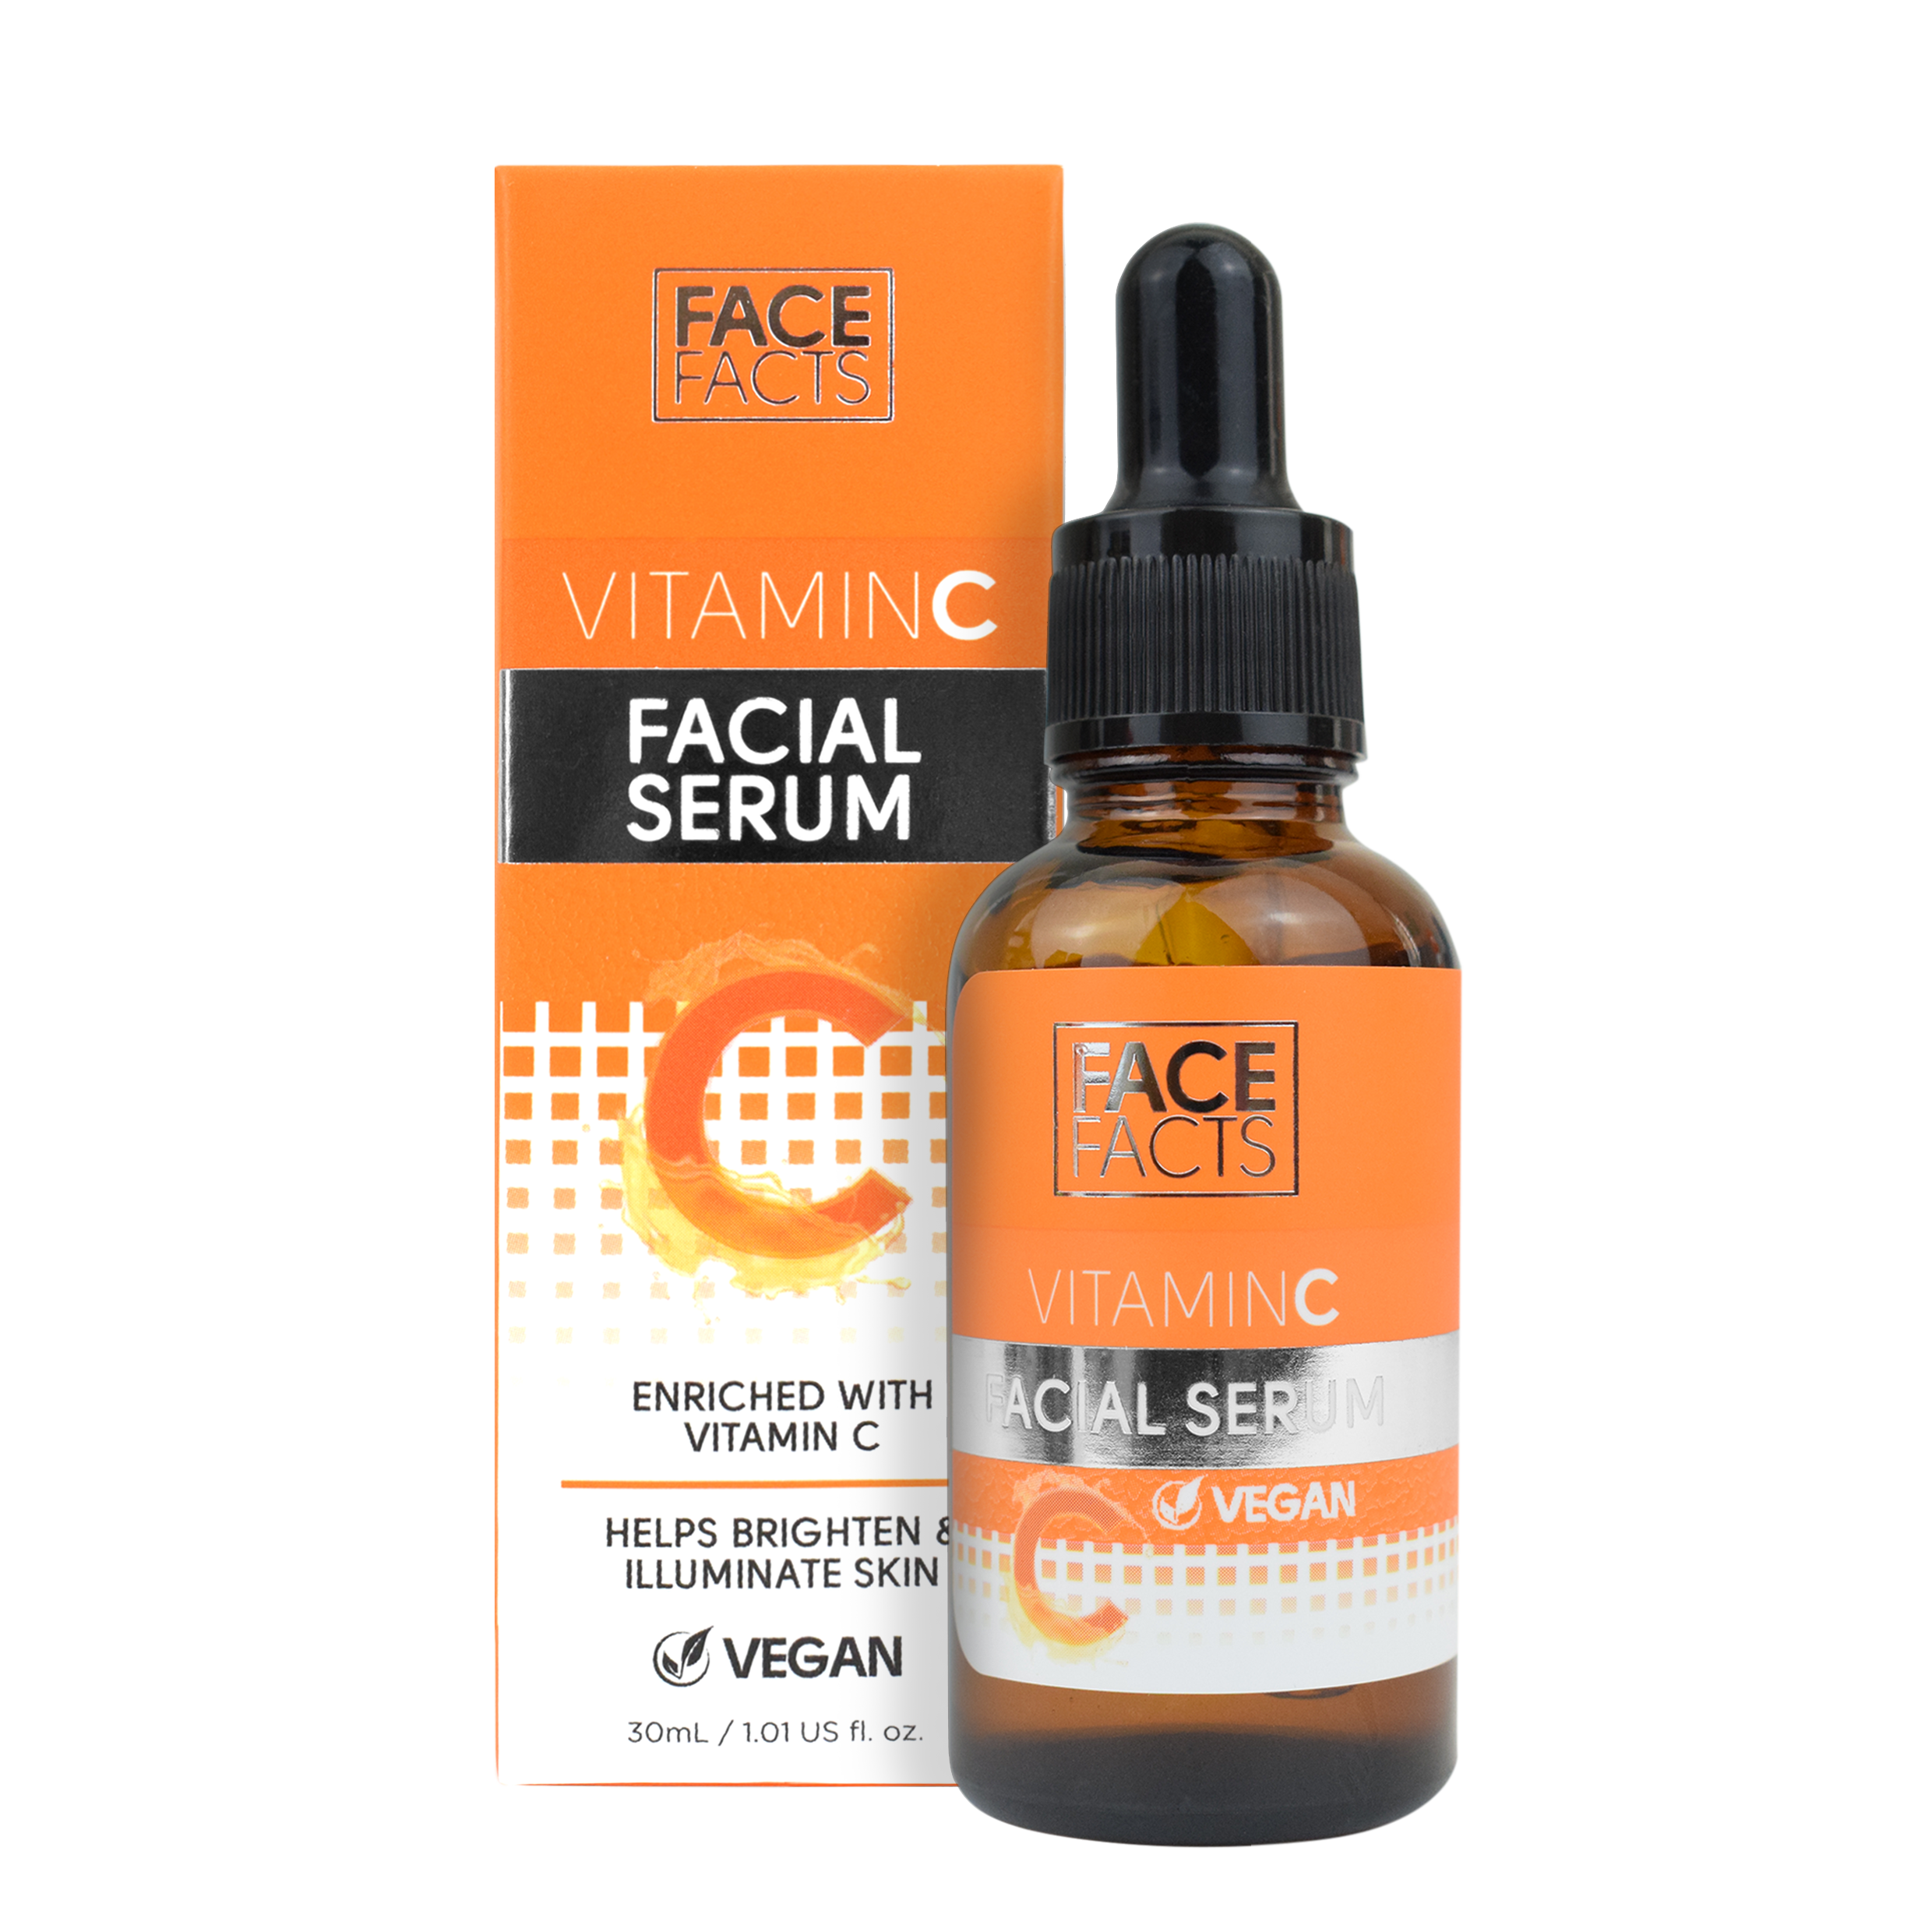 19523-150 Face Facts Vitamin C Facial Serum BOX and BOTTLE (1)